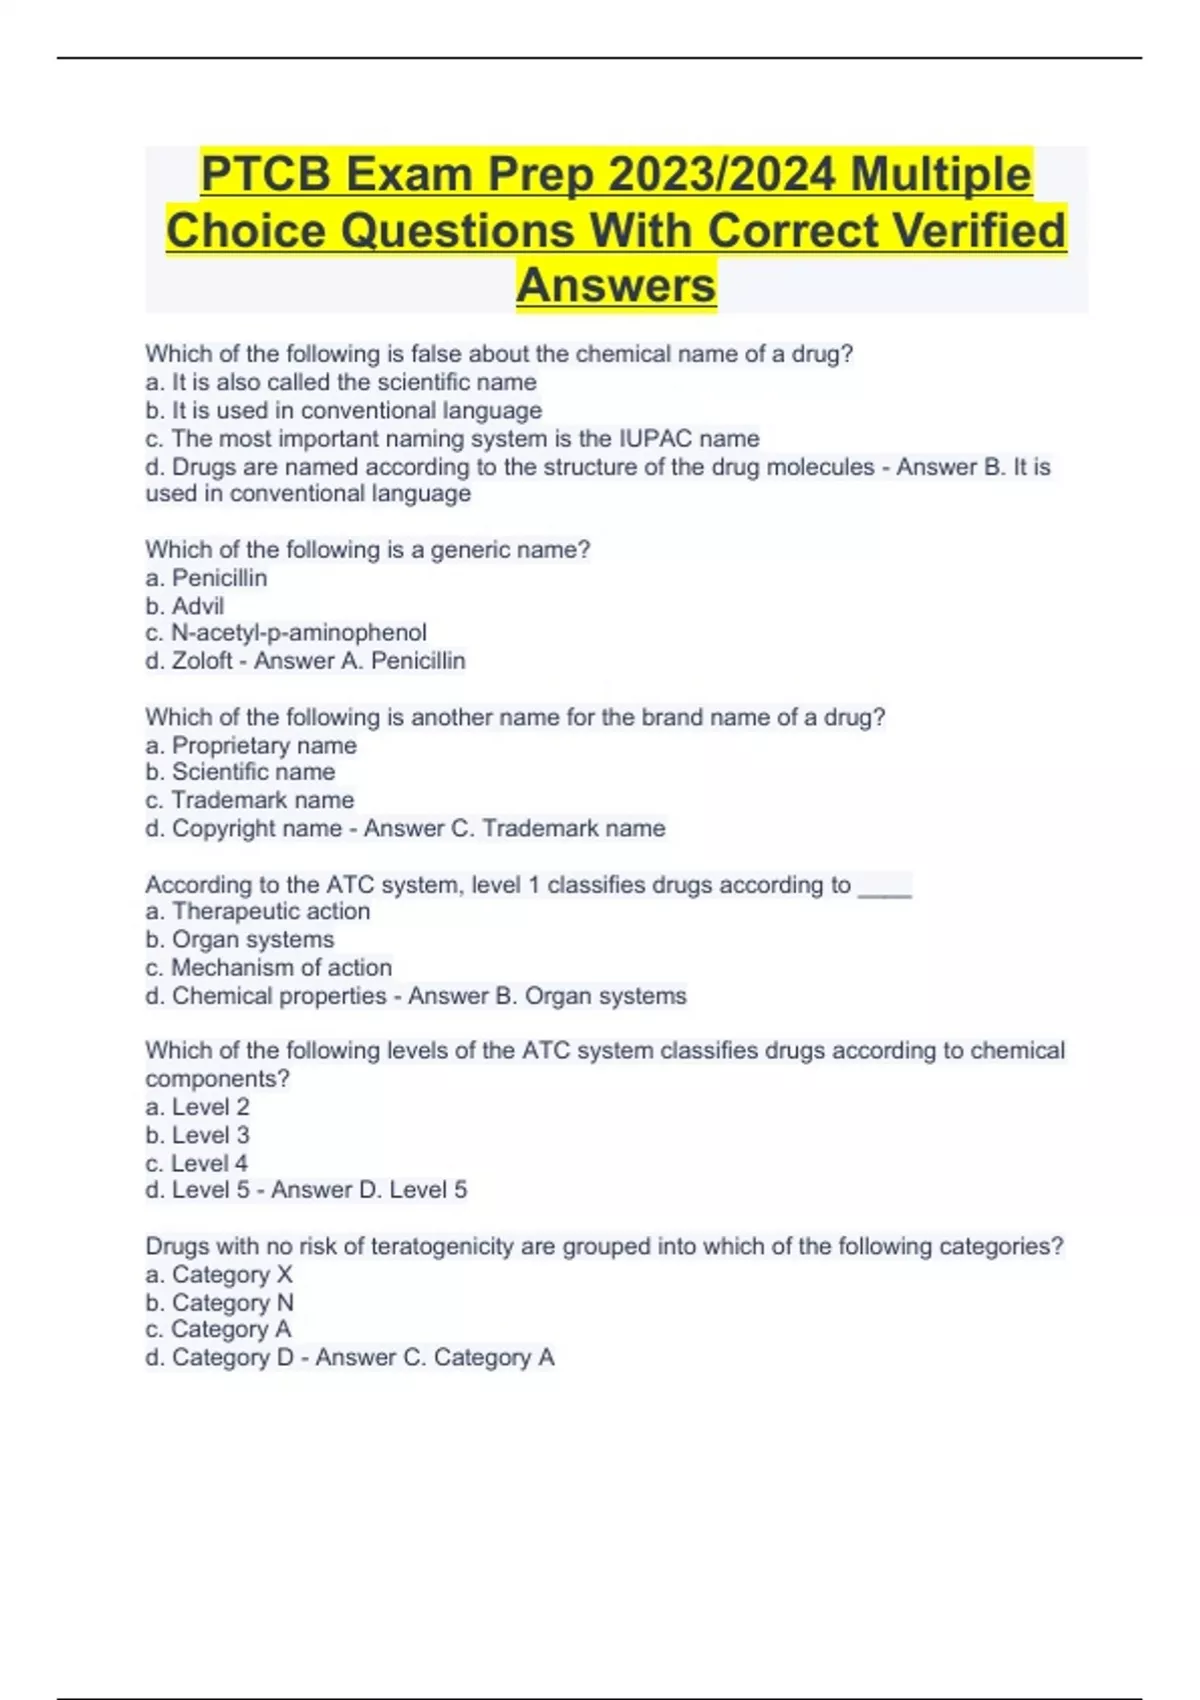 PTCB Exam Prep 2023/2024 Multiple Choice Questions With Correct